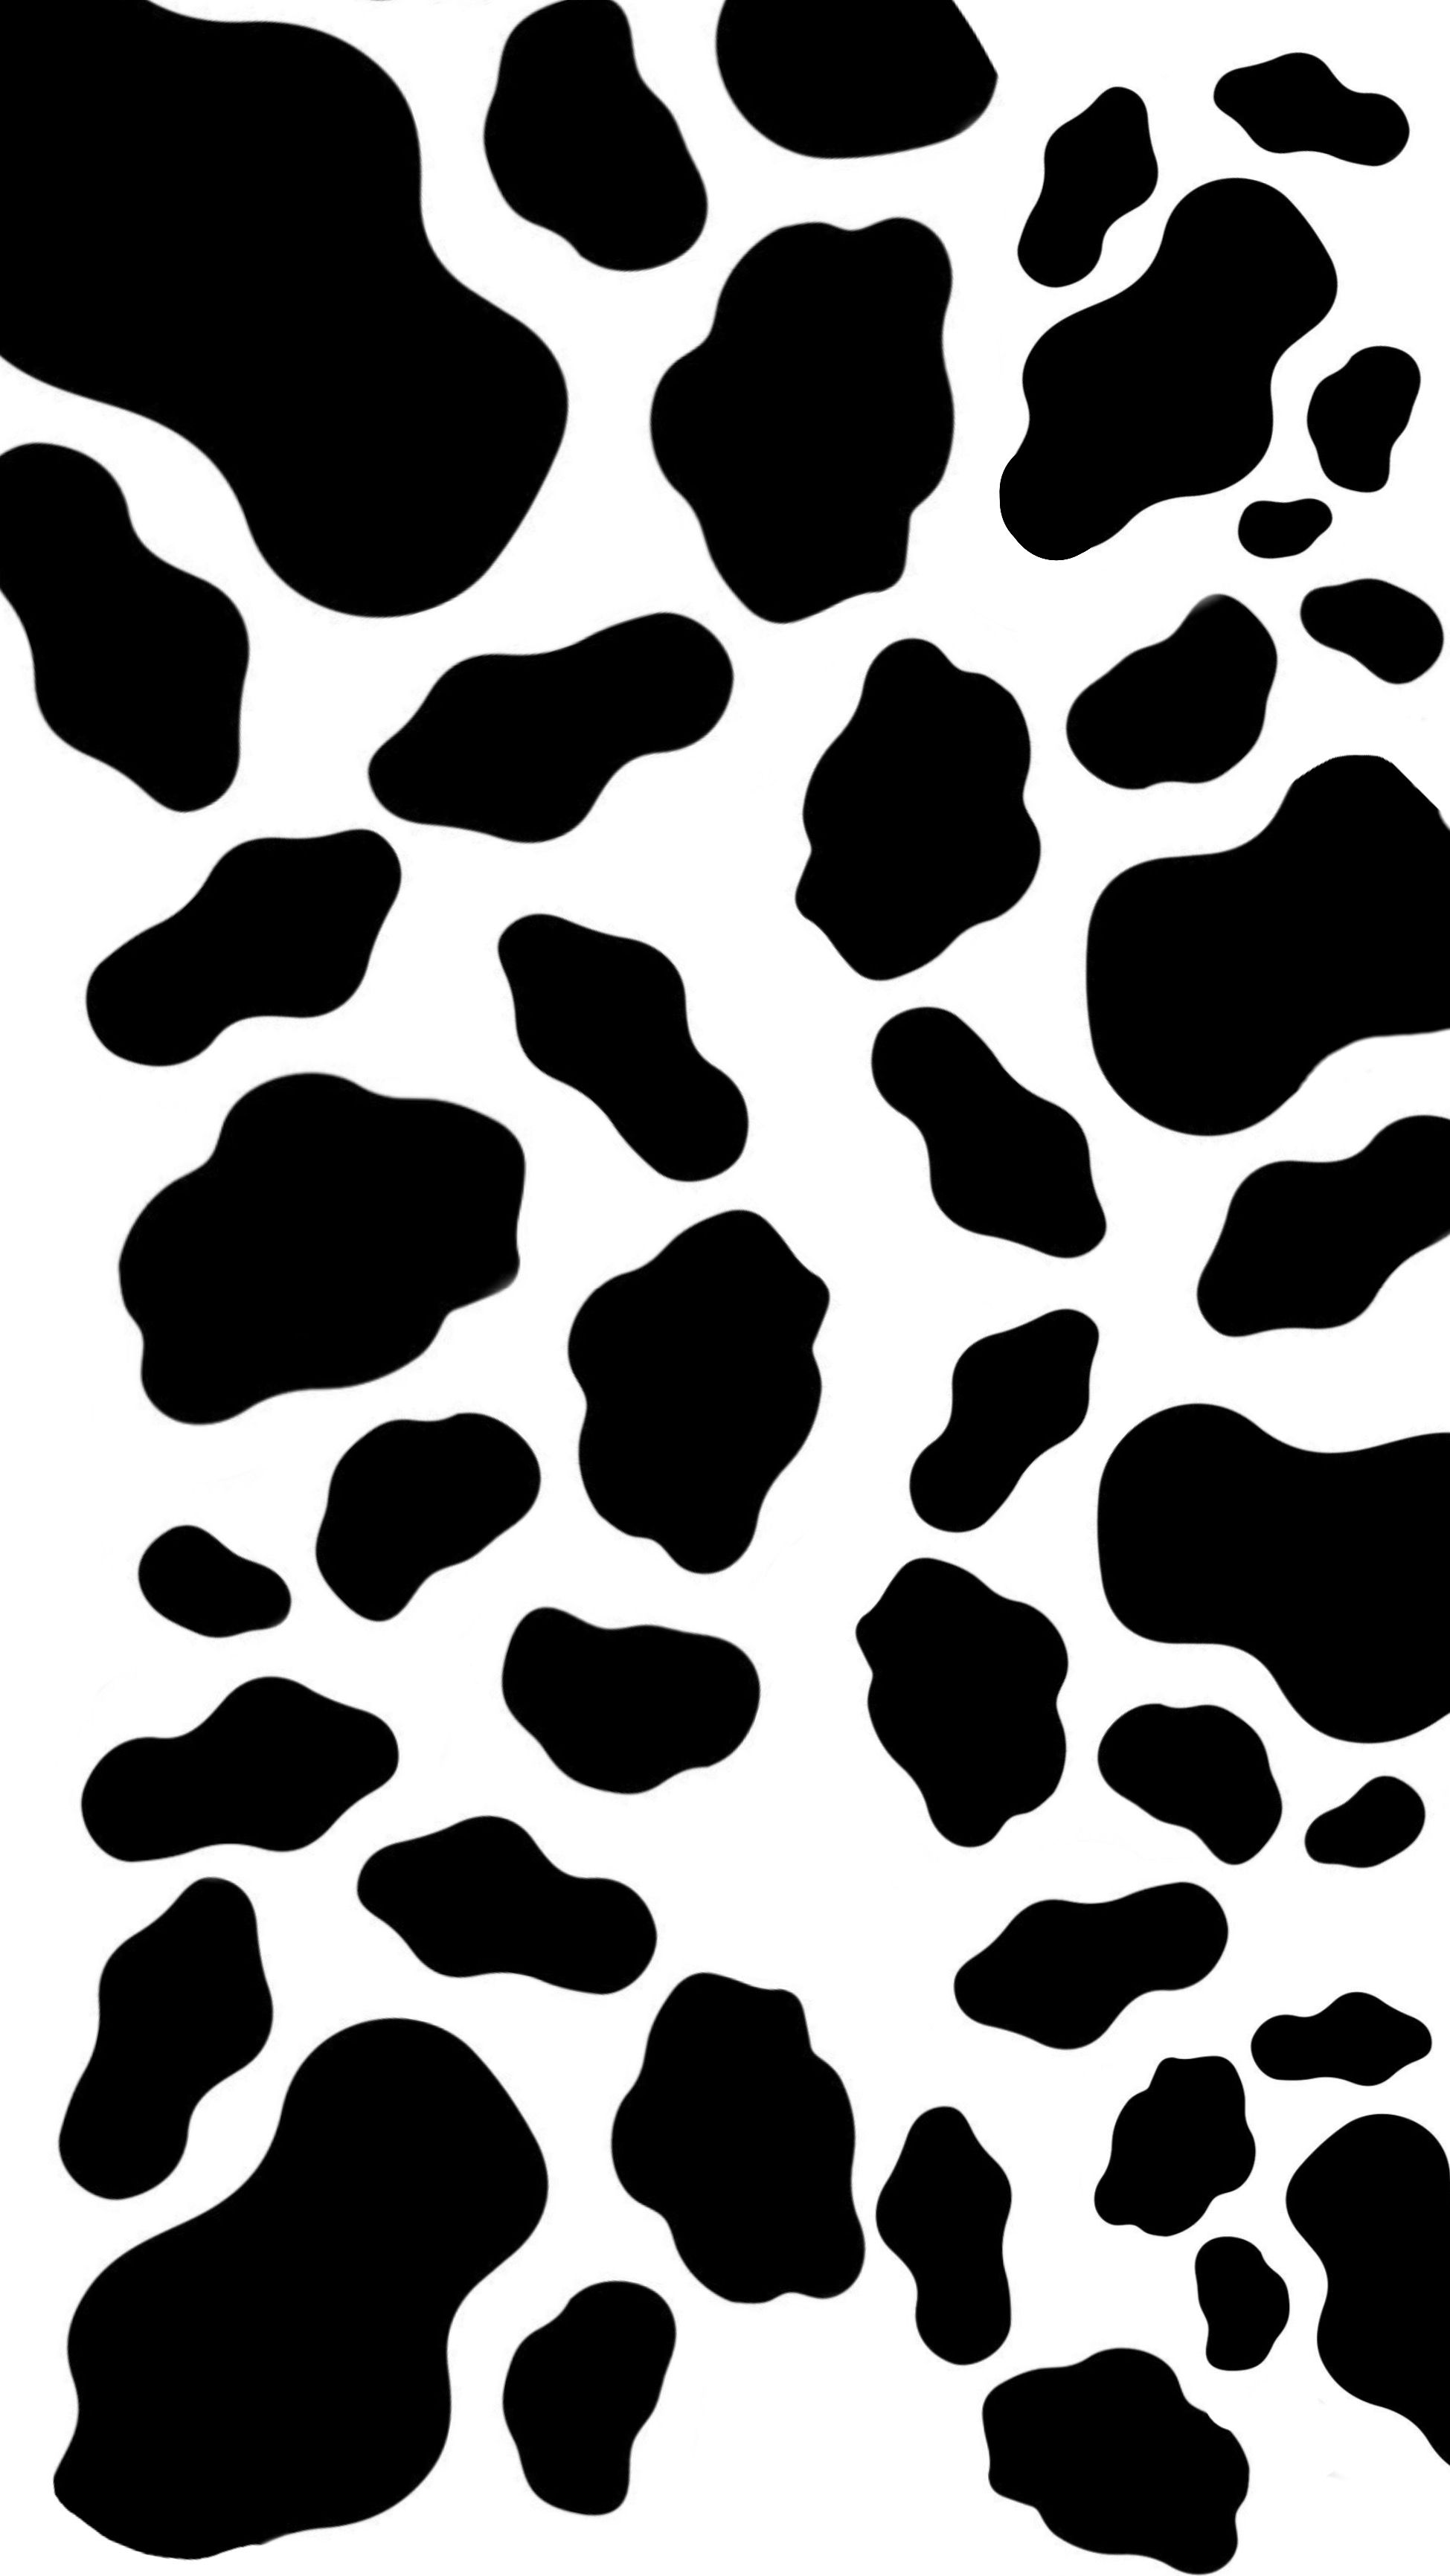 Cow Print Wallpapers - Wallpaper Cave